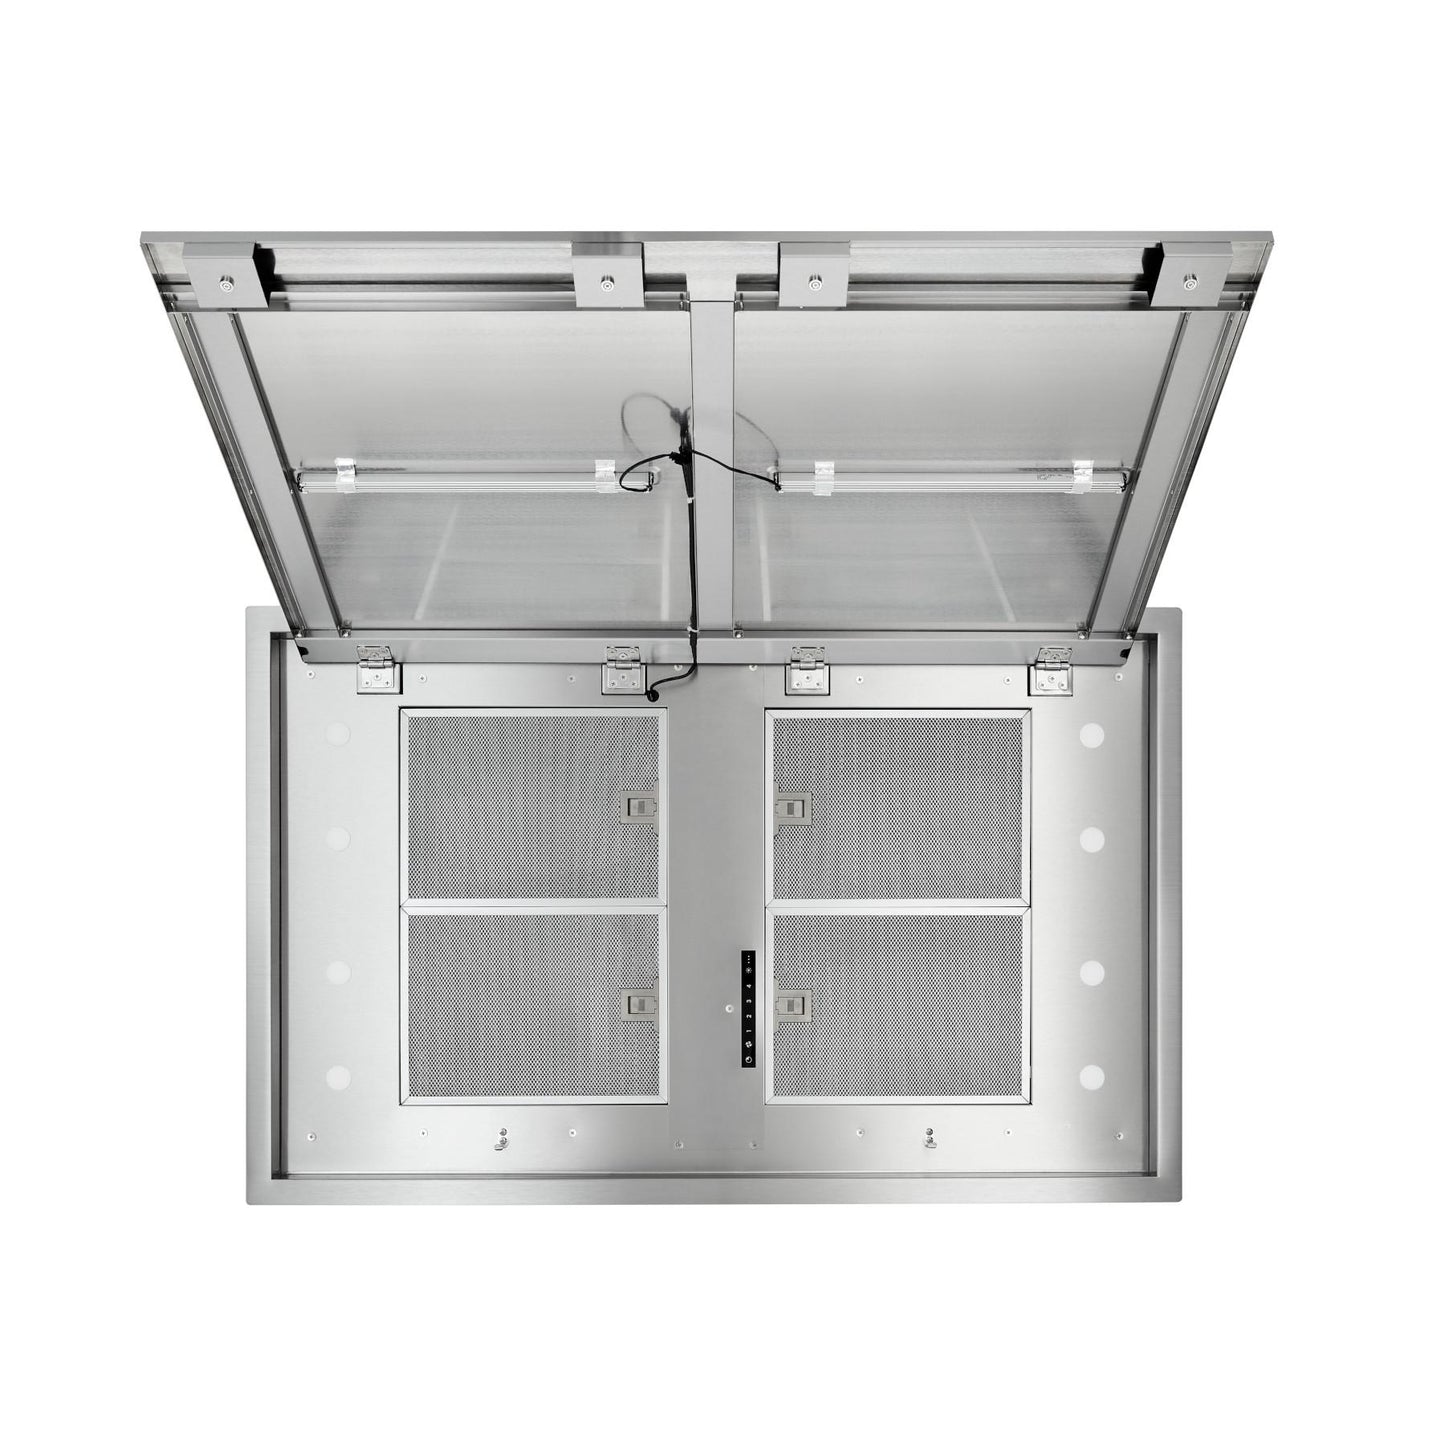 Best Range Hoods HBC143ESS 43-Inch Brushed Stainless Steel Ceiling Mounted Range Hood With Led Light, Choice Of Blowers Sold Separately (Hbc1 Series)